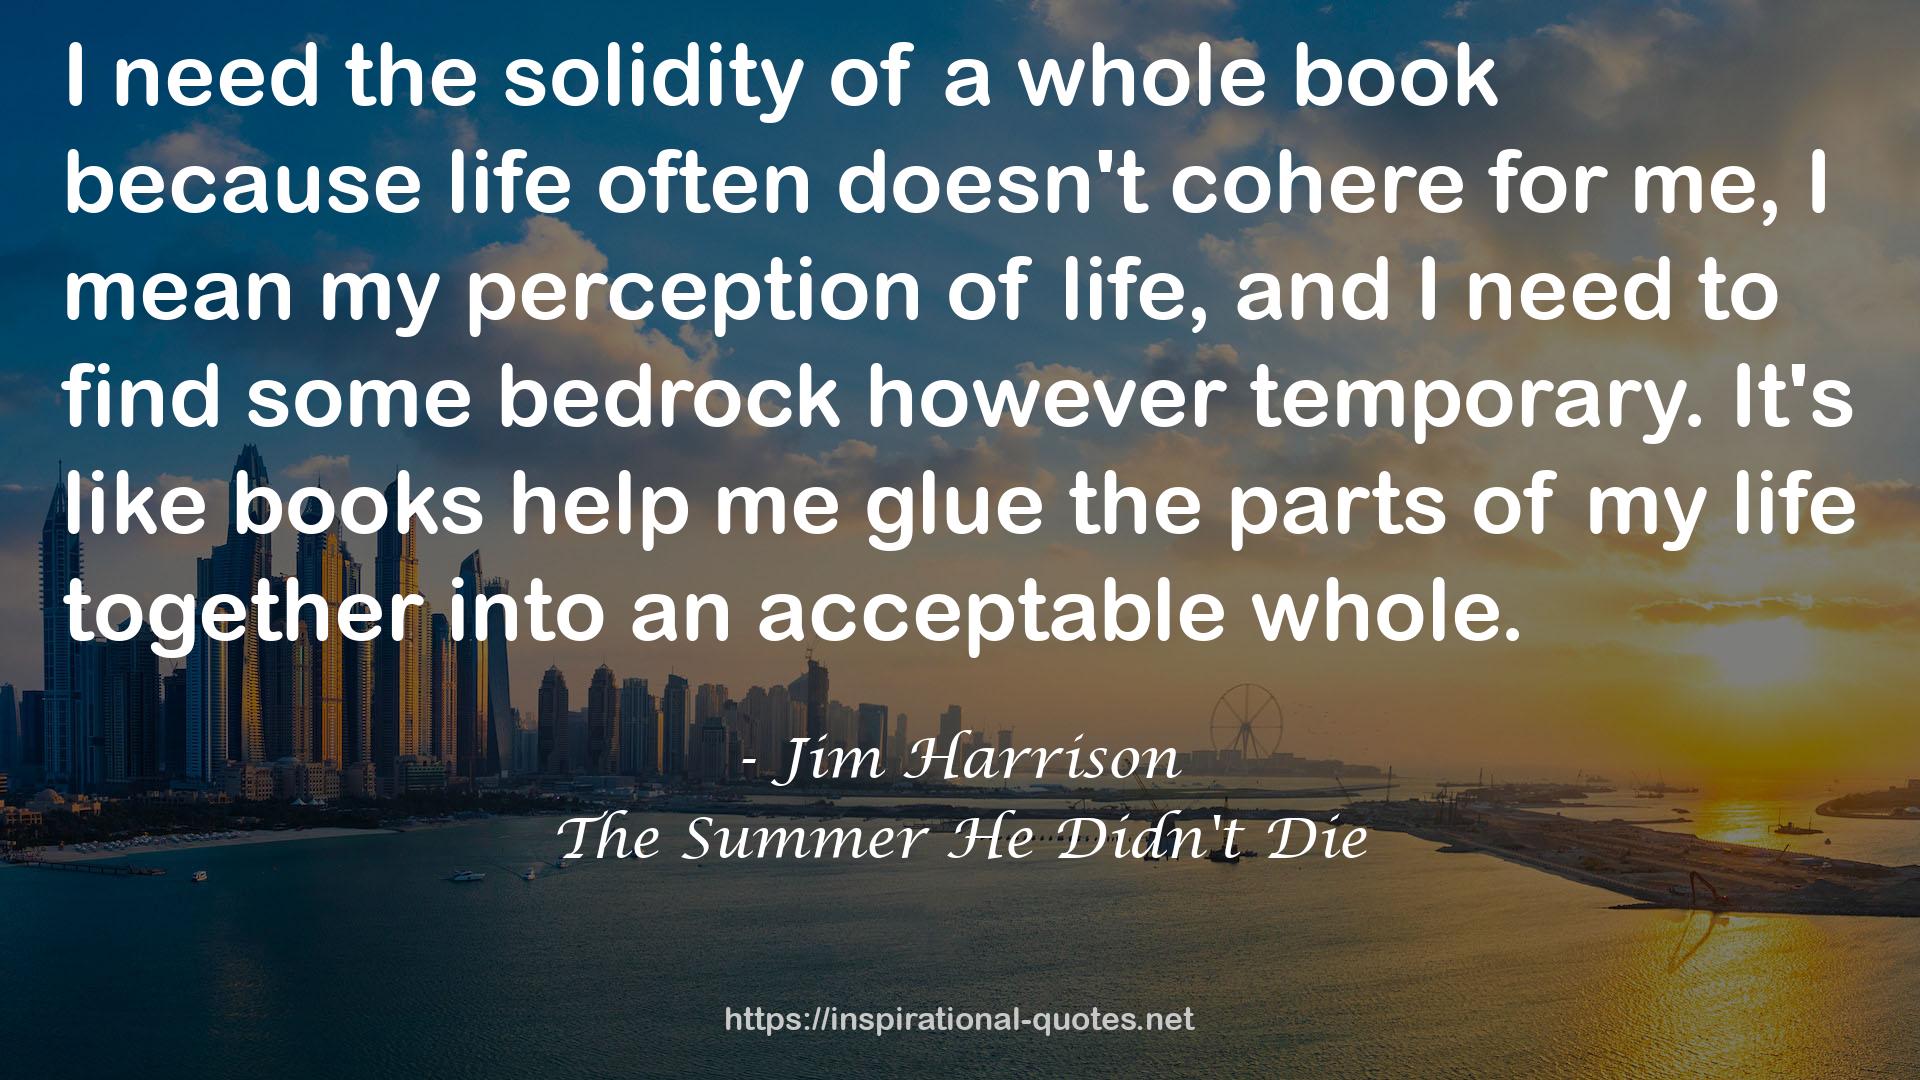 The Summer He Didn't Die QUOTES